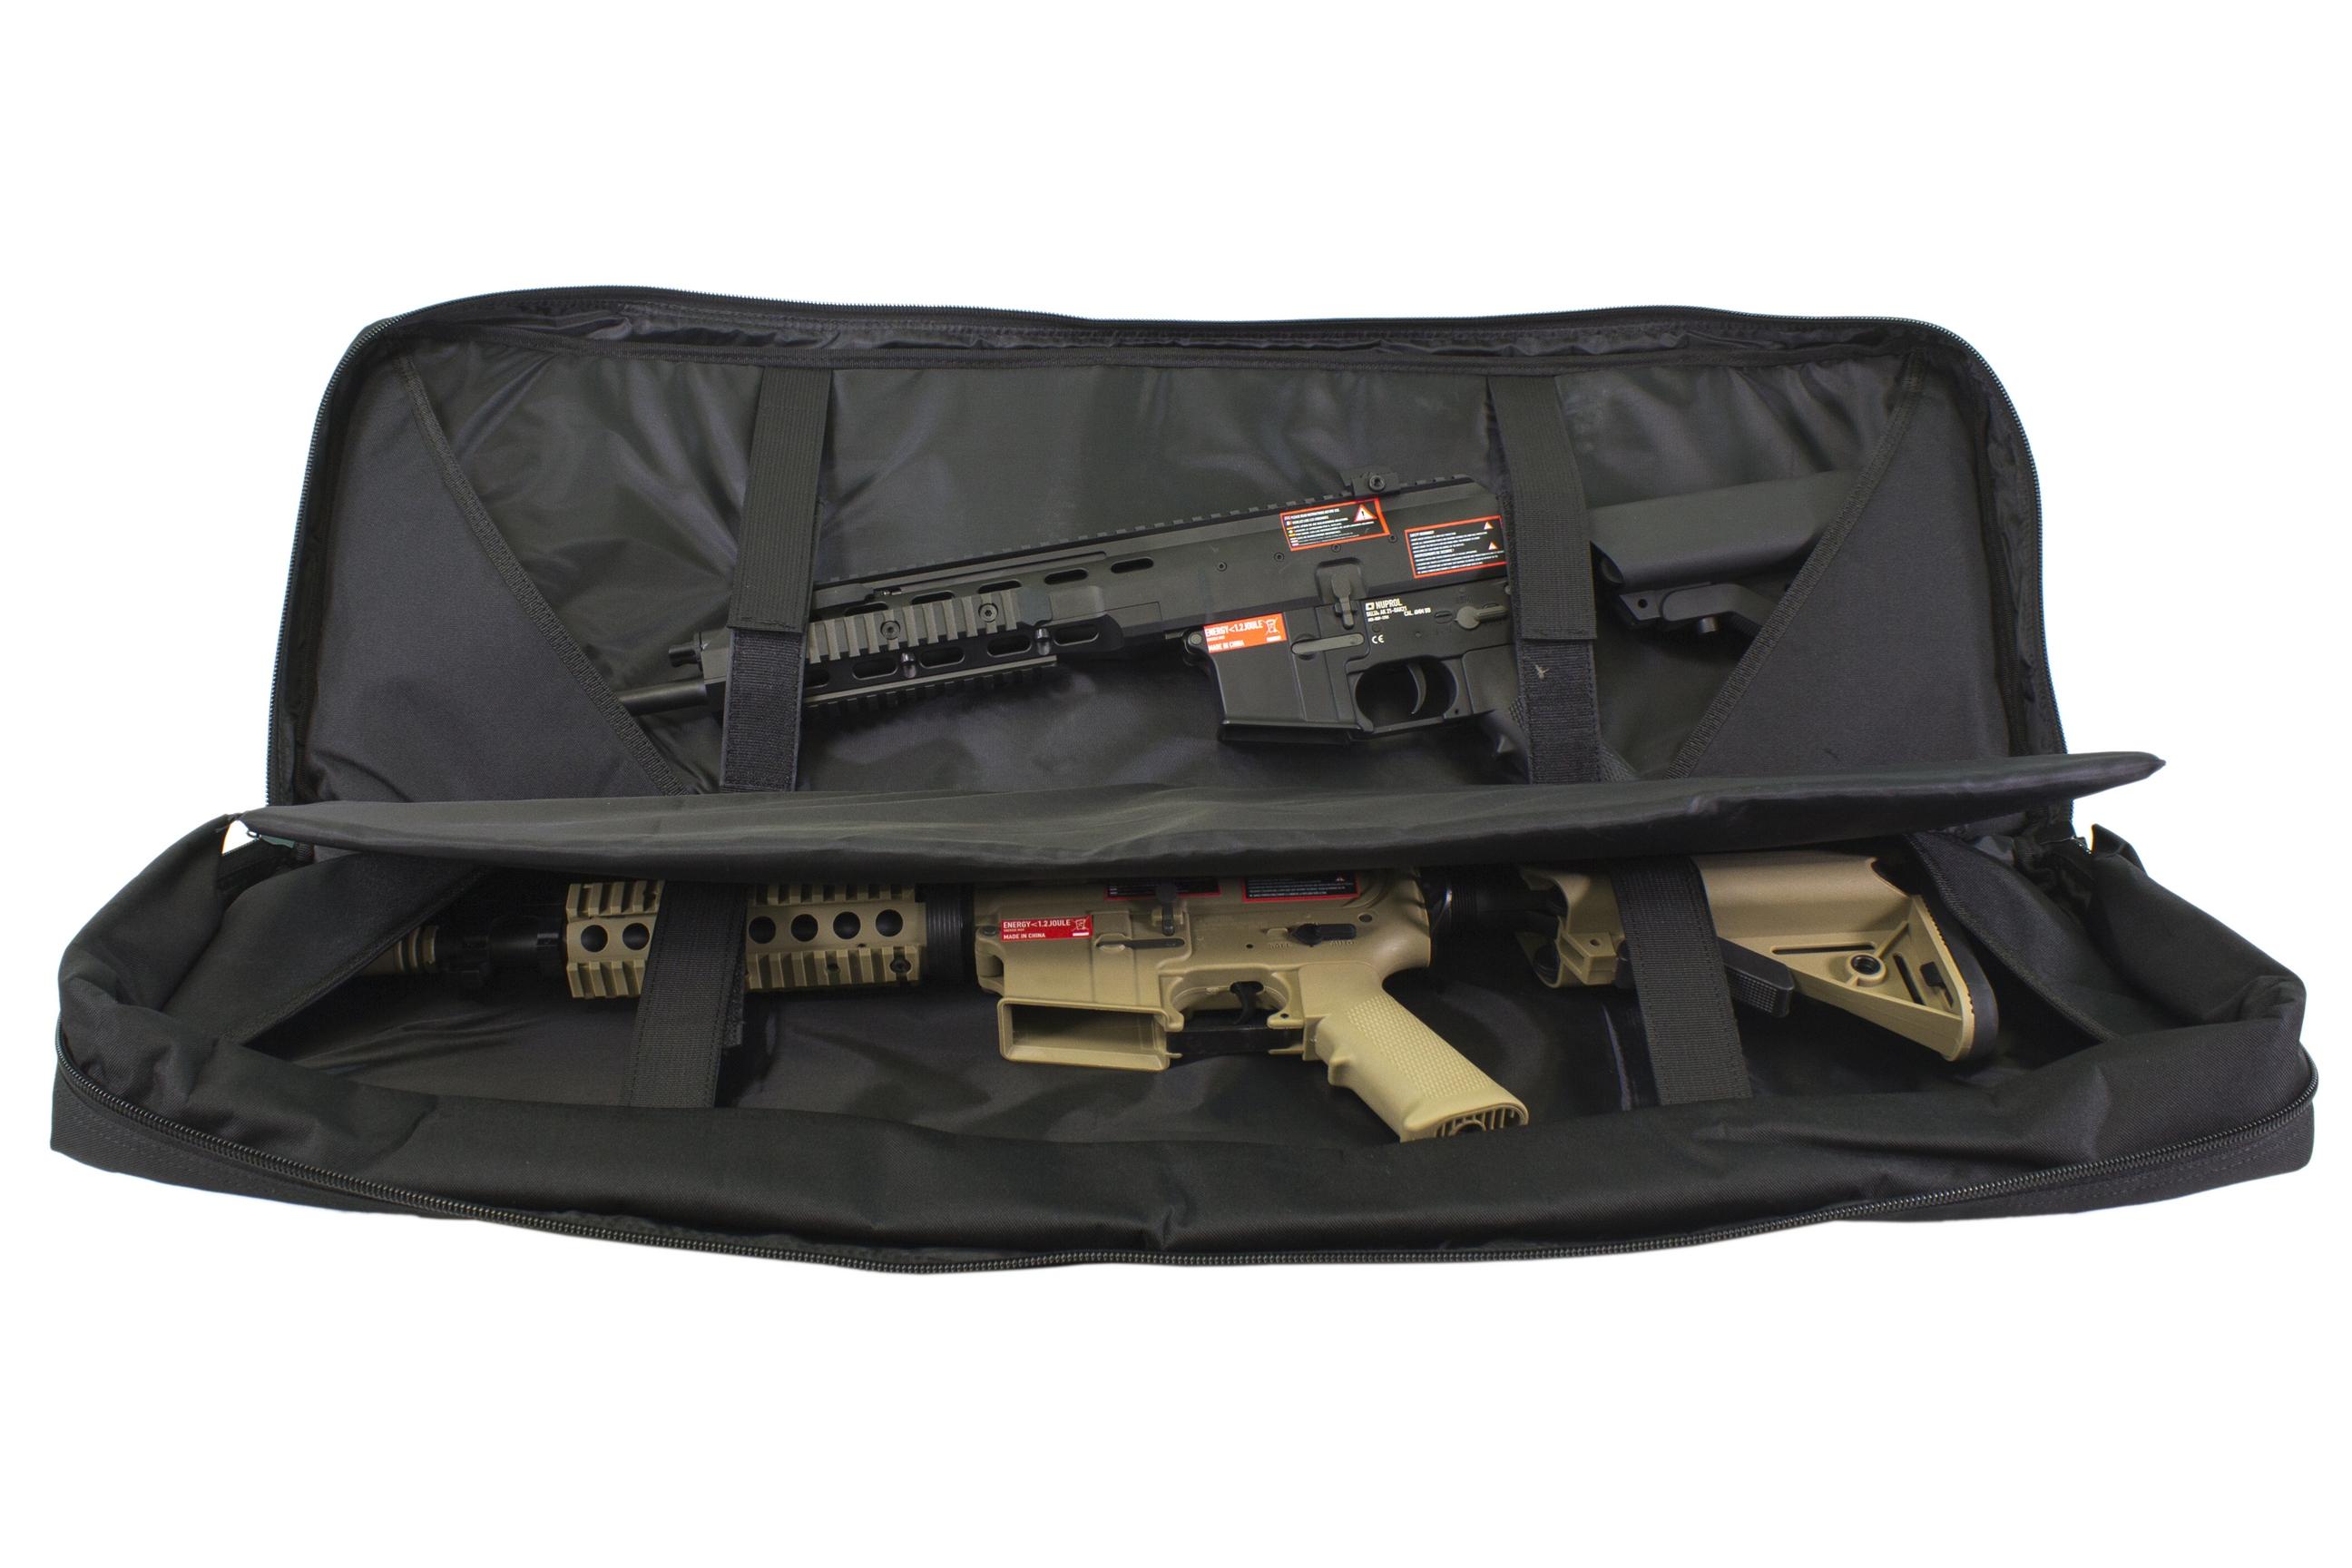 NUPROL NP Soft Riffle Bag PMC Deluxe  46"